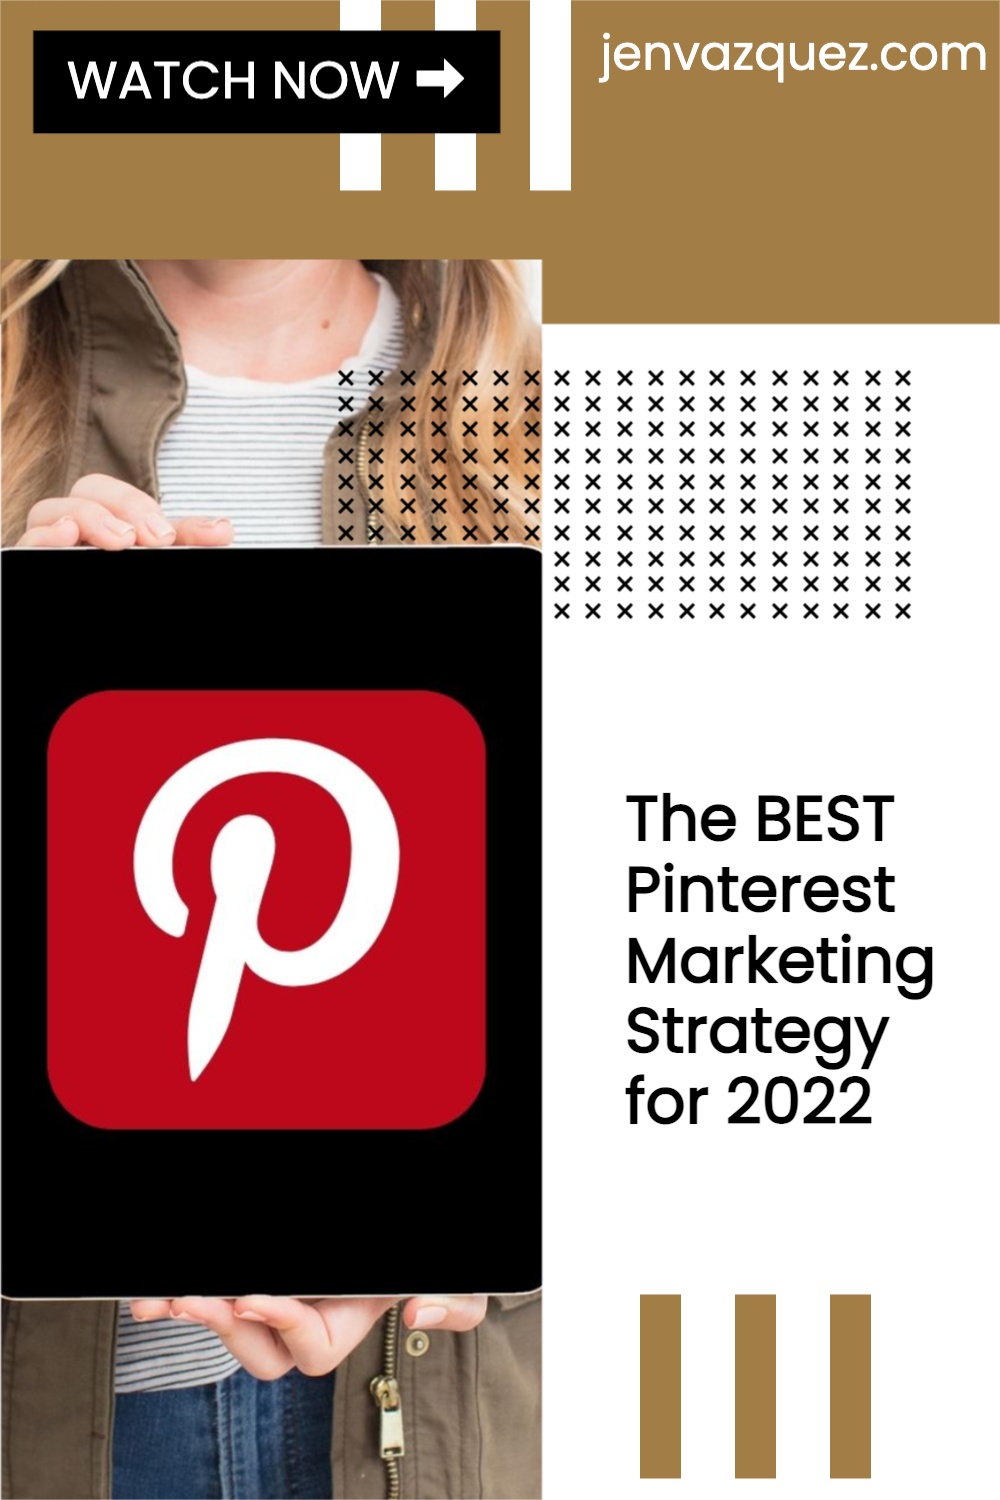 The BEST Pinterest Marketing Strategy for 2022